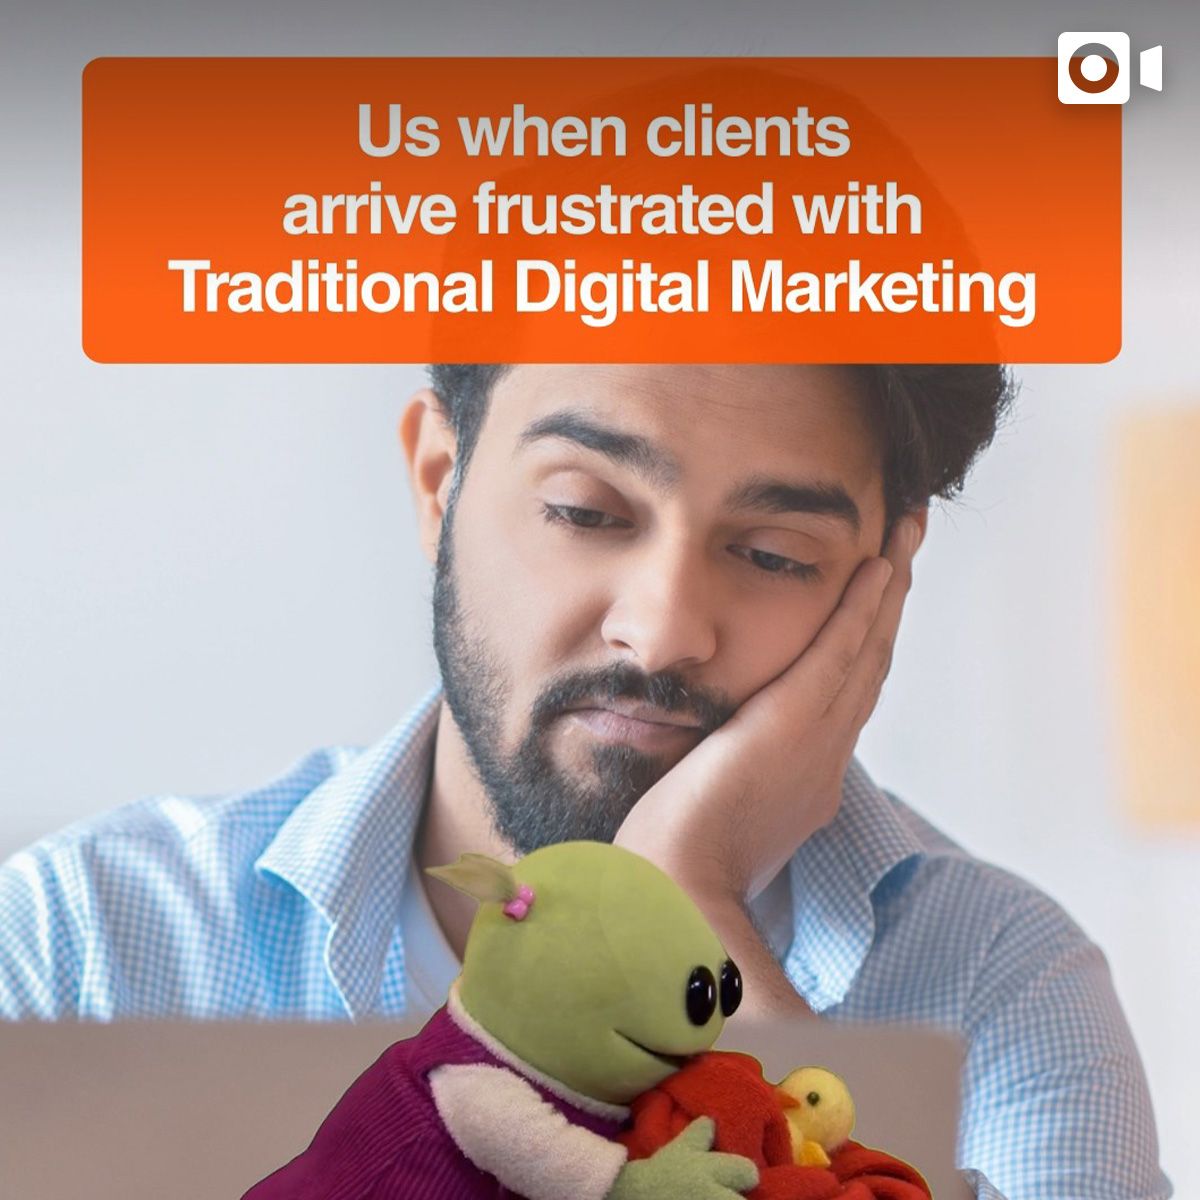 Us when clients arrive frustrated with Traditional Digital Marketing